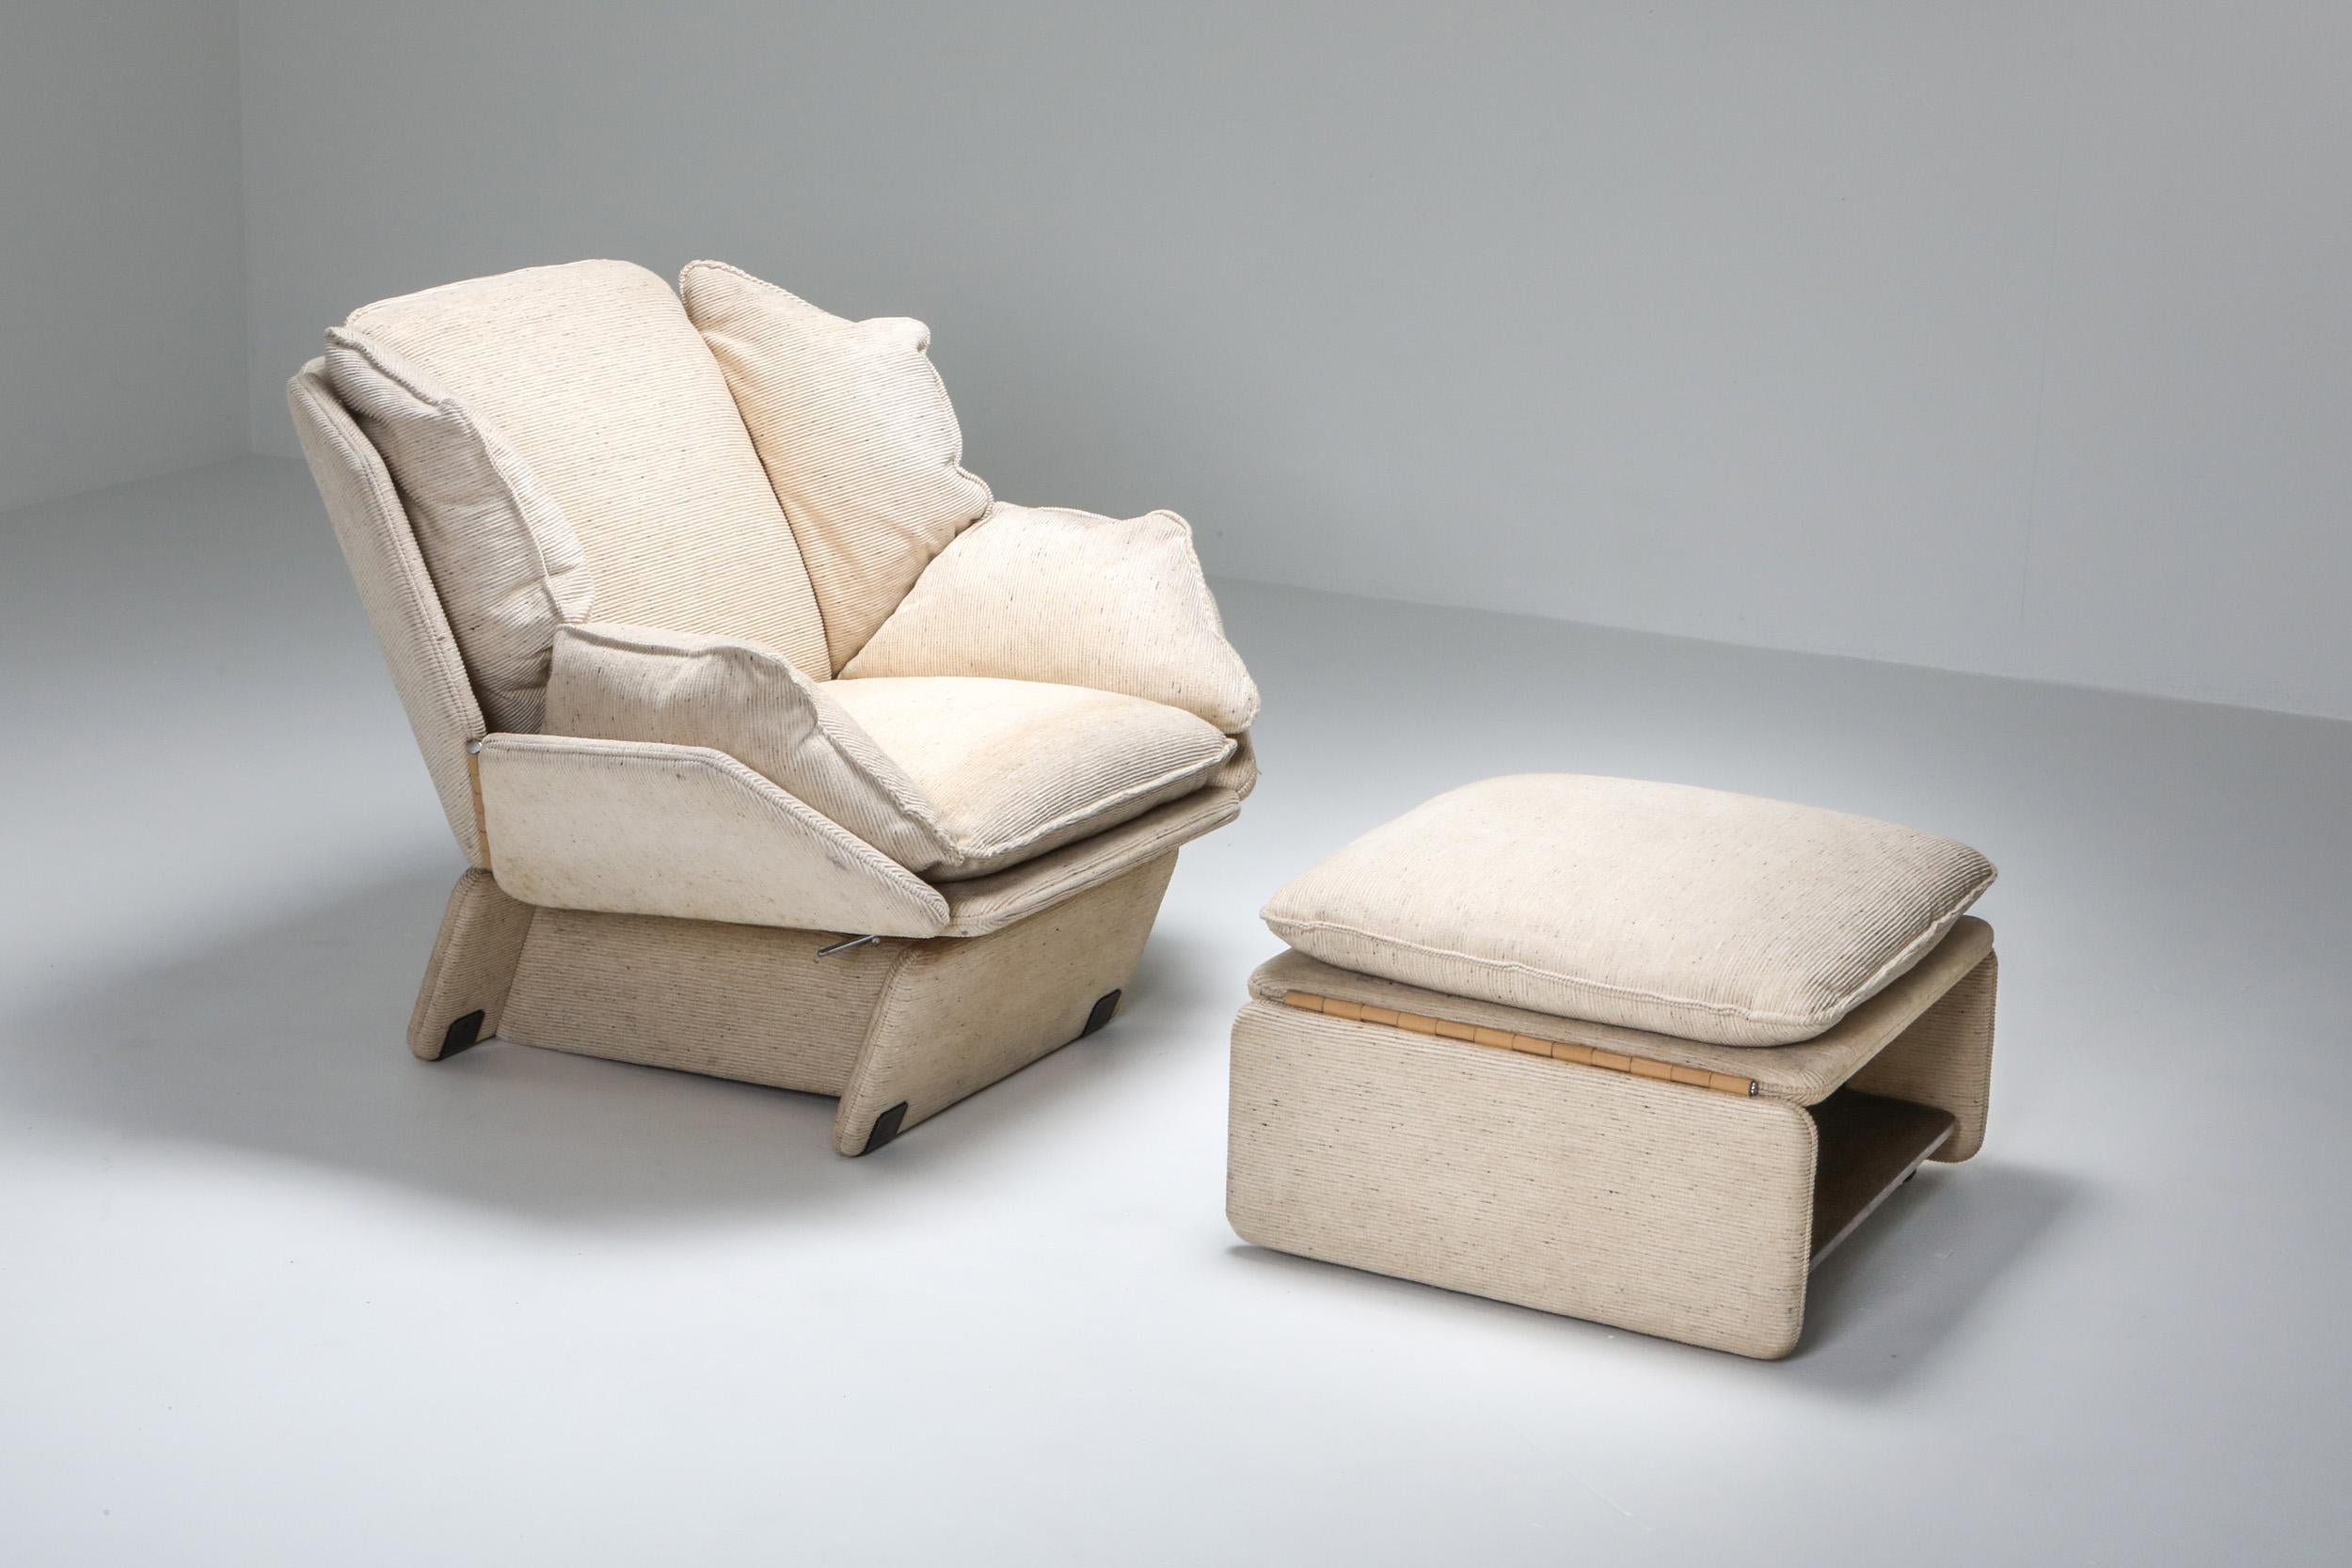 Postmodern lounge chairs with ottoman, Saporiti, Italy, 1970s

The most comfortable easy chair you might ever sit in.
Unusual lounge chair who'd fit perfectly with the architectural John Lautner Goldstein house.
The lounge chair has a reclining